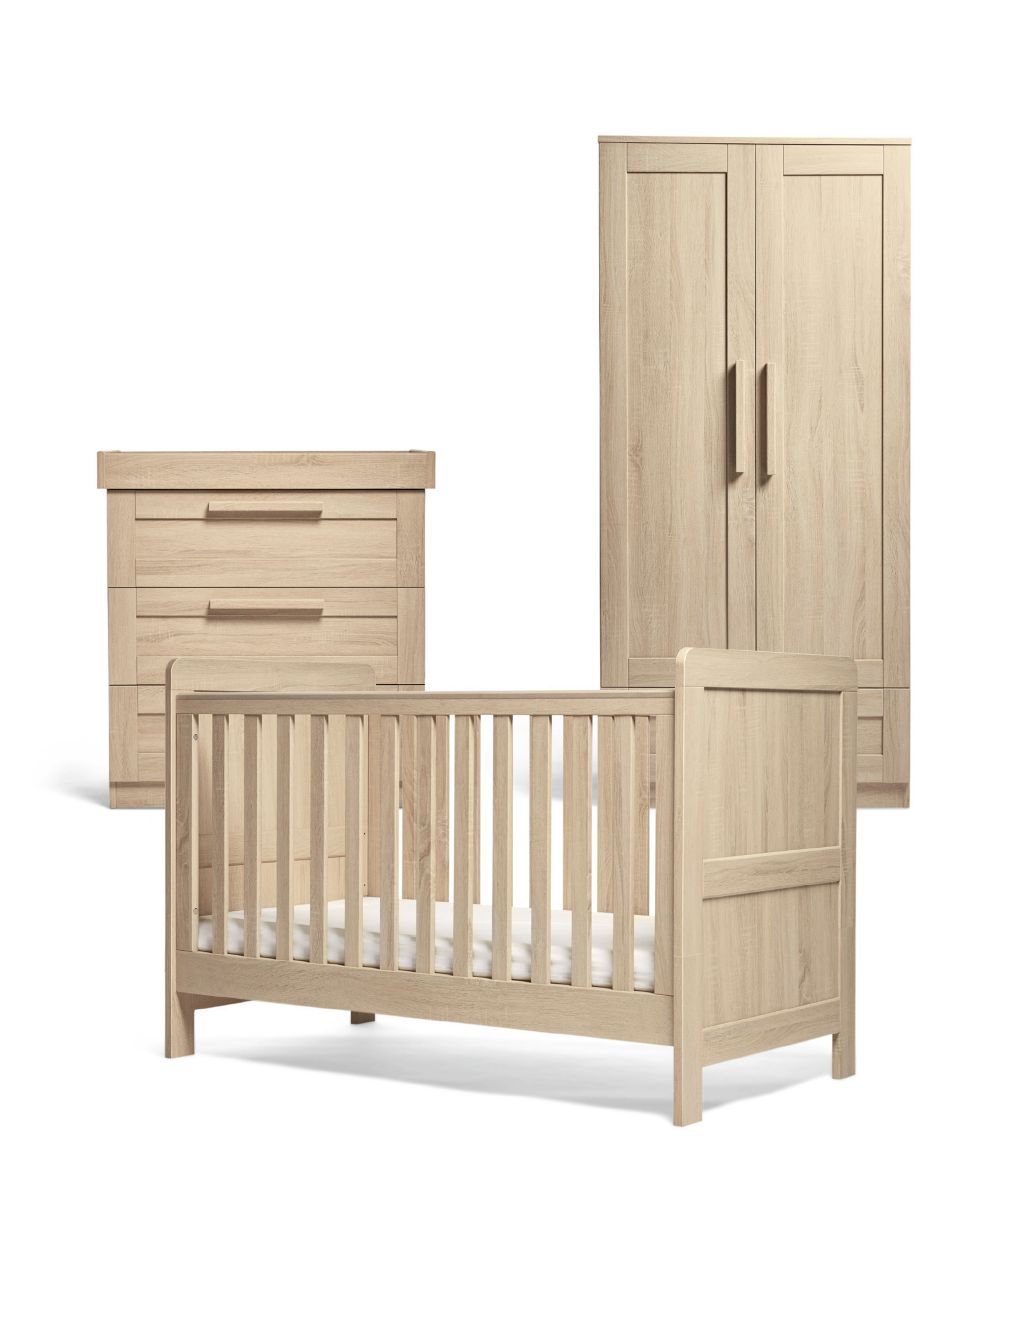 Atlas 3 Piece Cotbed Range with Dresser and Wardrobe image 1